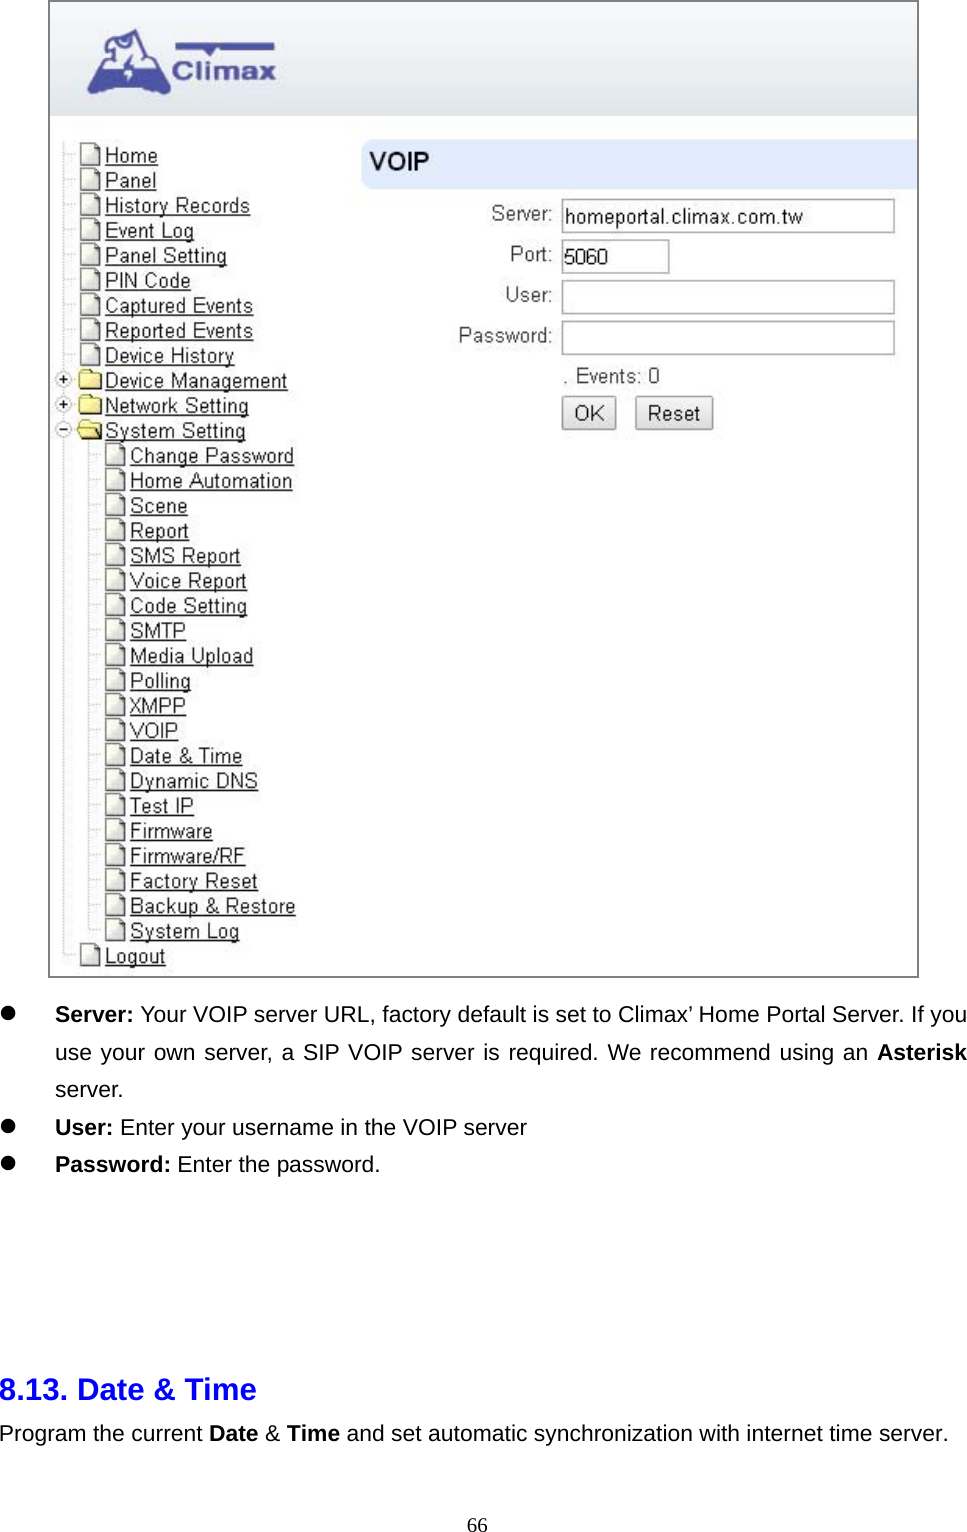  66  Server: Your VOIP server URL, factory default is set to Climax’ Home Portal Server. If you use your own server, a SIP VOIP server is required. We recommend using an Asterisk server.  User: Enter your username in the VOIP server  Password: Enter the password.      8.13. Date &amp; Time     Program the current Date &amp; Time and set automatic synchronization with internet time server.   